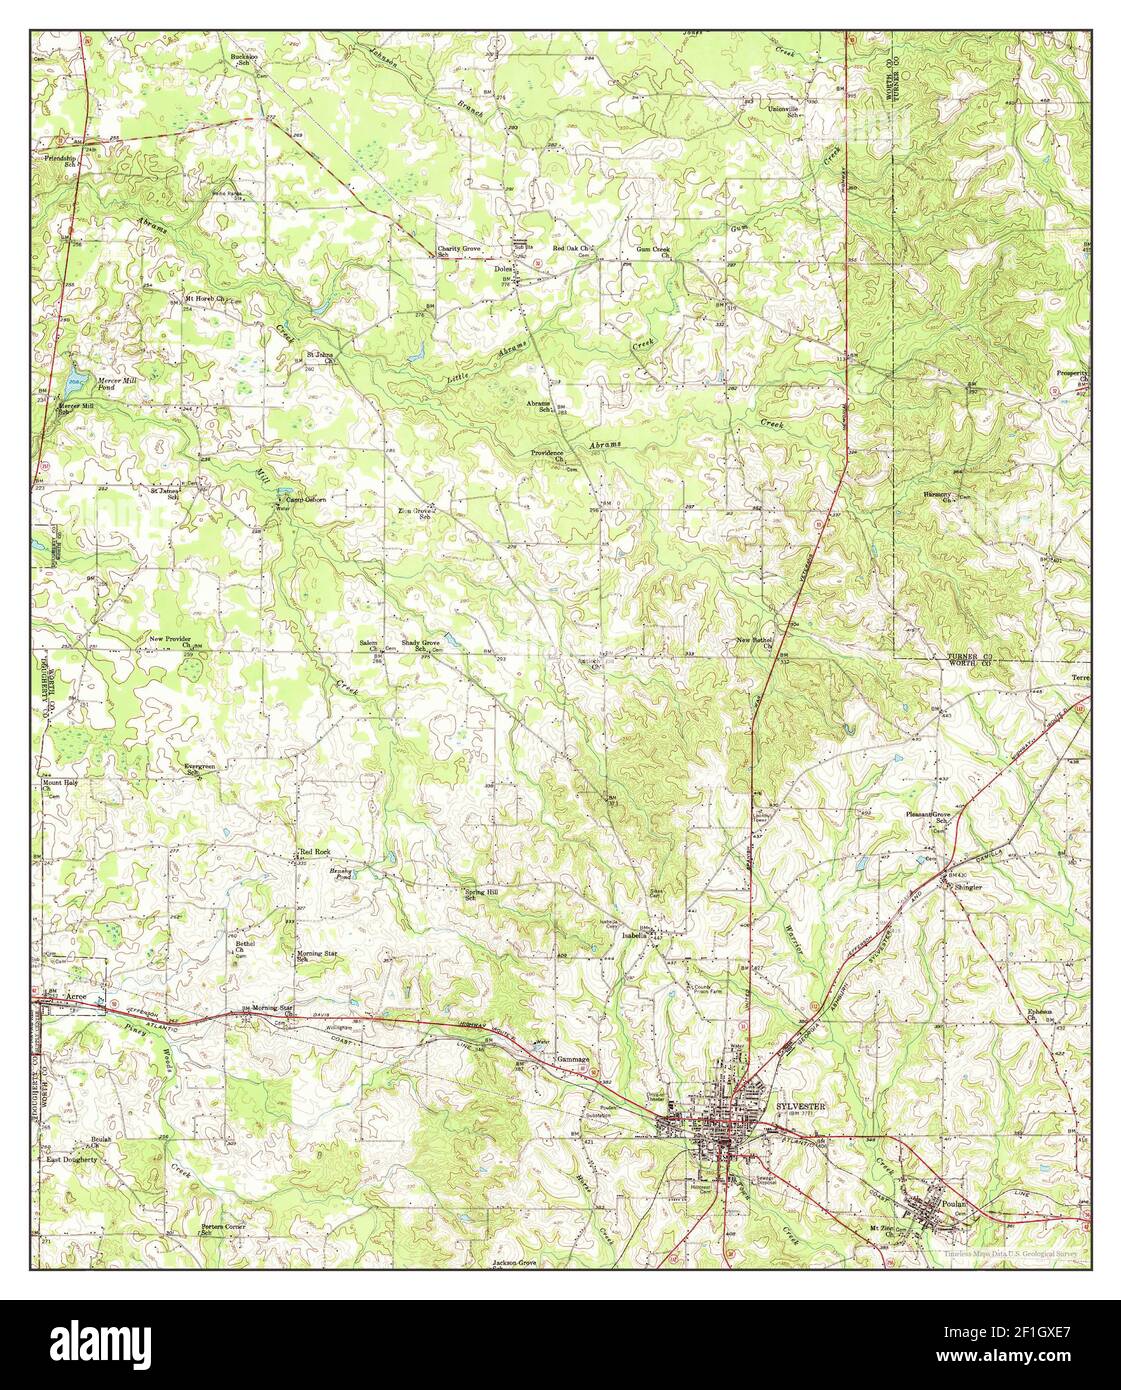 Sylvester, Georgia, map 1956, 1:62500, United States of America by Timeless Maps, data U.S. Geological Survey Stock Photo